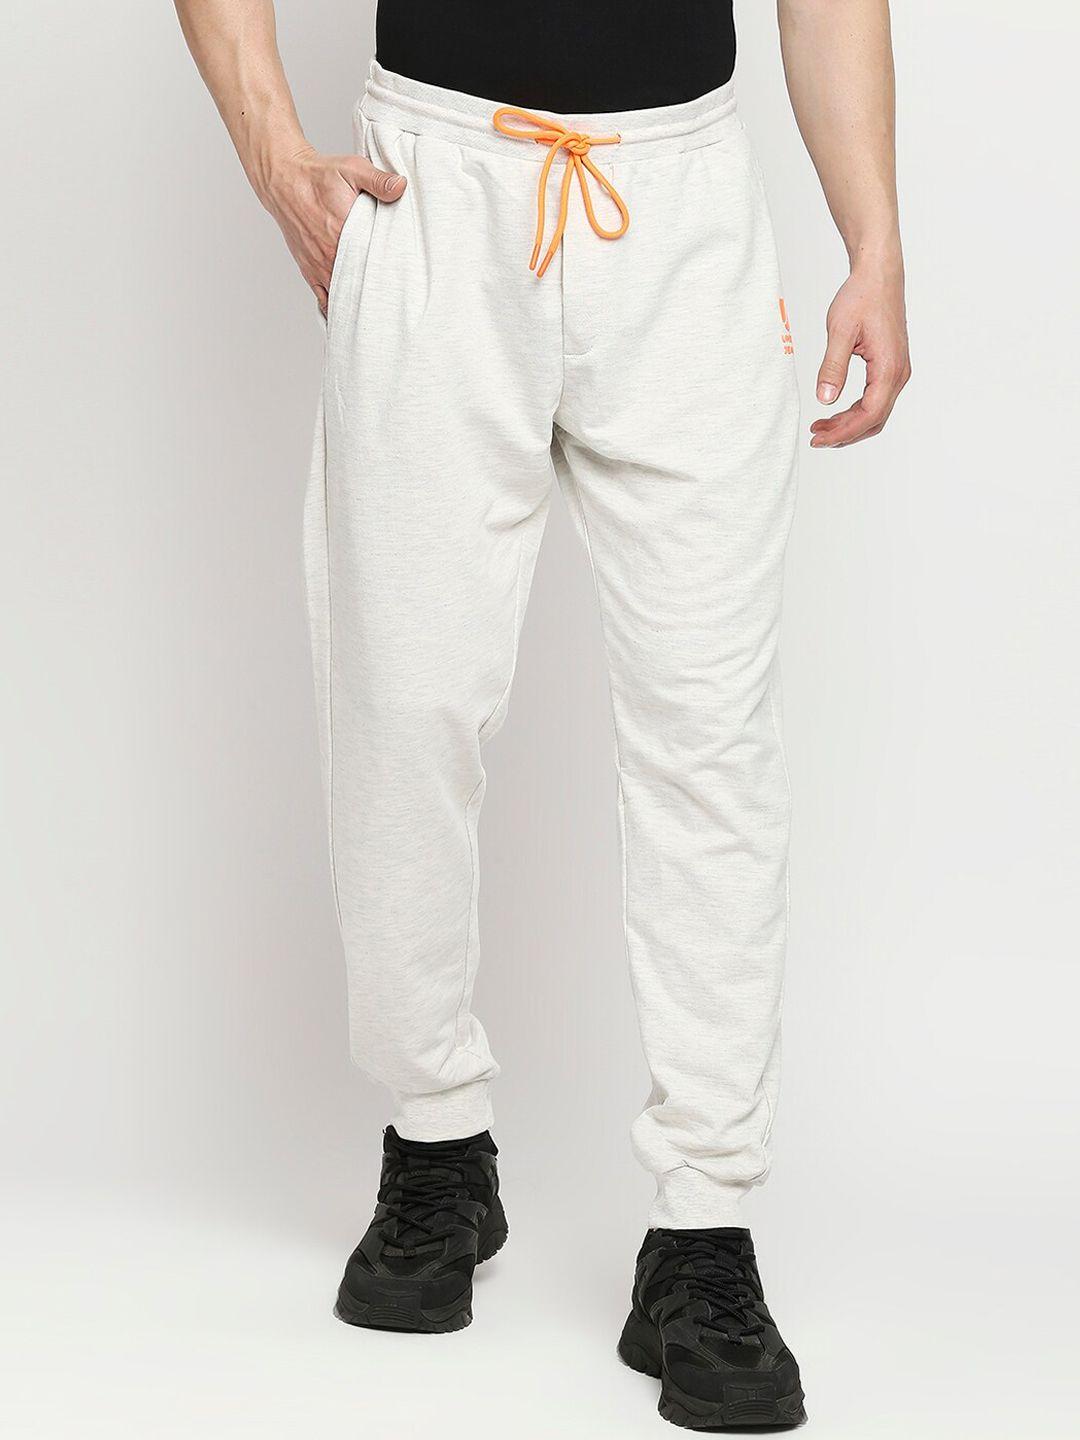 underjeans-by-spykar-men-off-white-solid-joggers